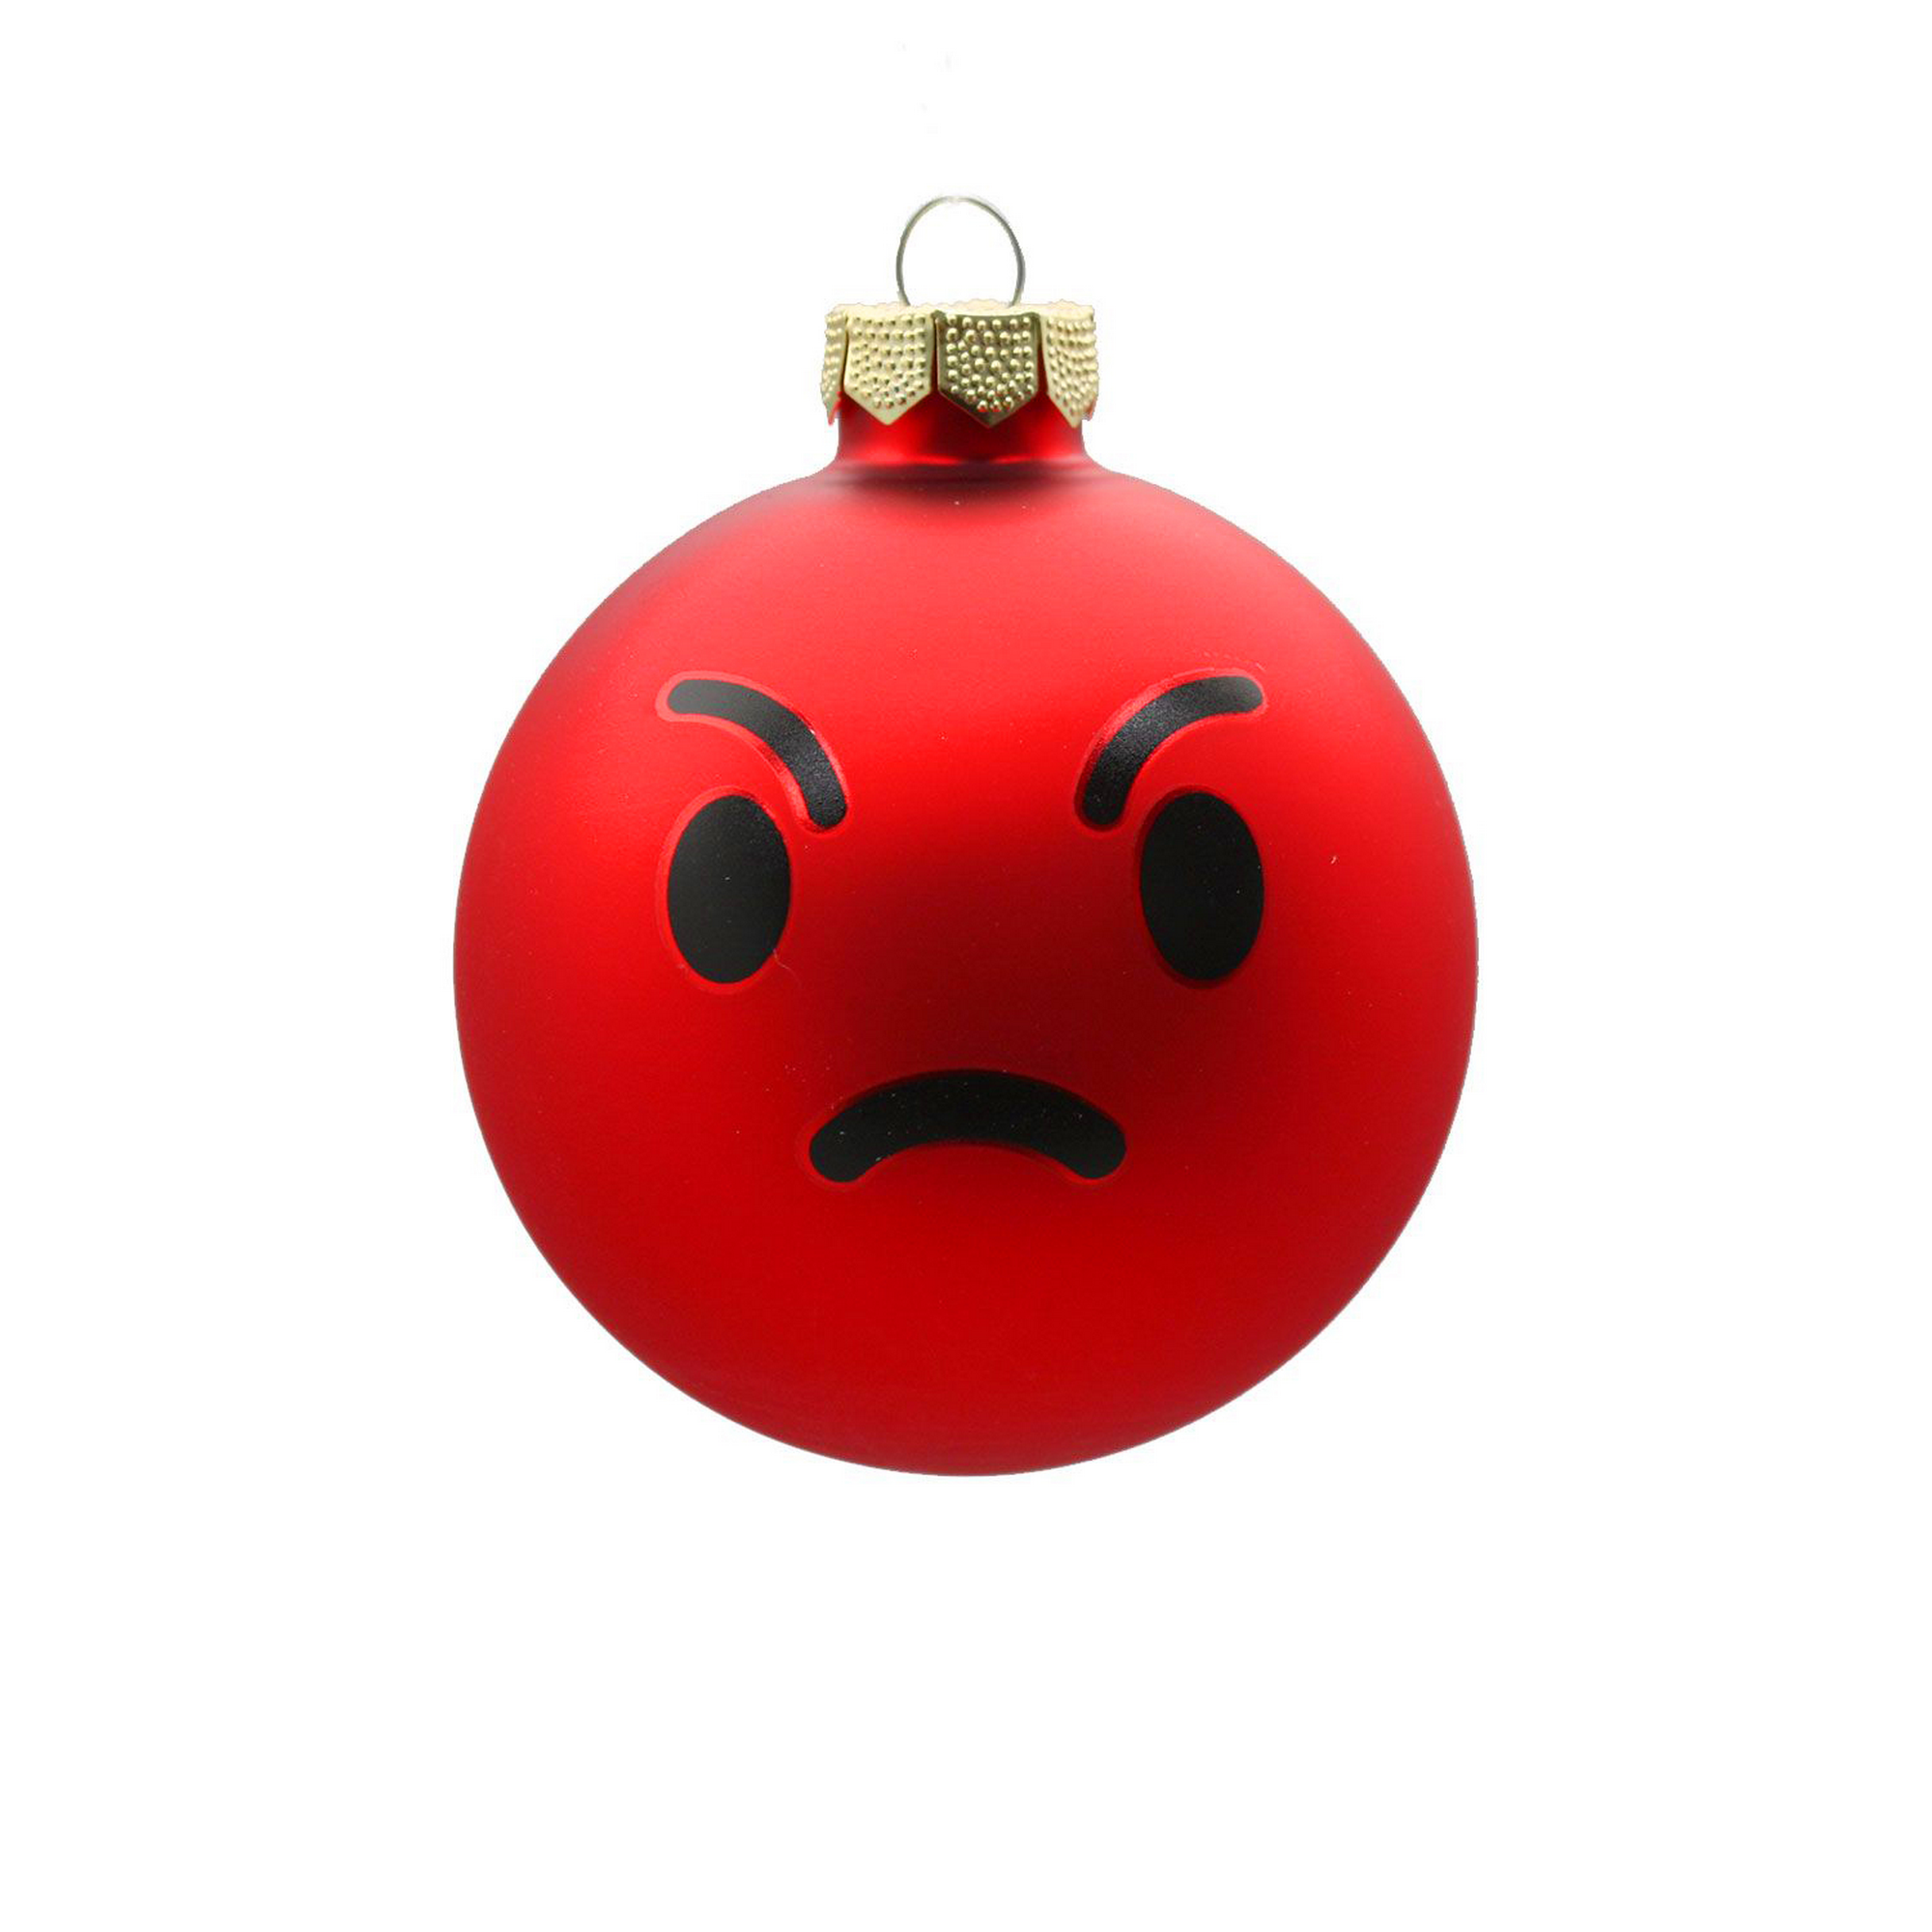 Christbaumkugel 'Inge-Moji Angry' Ø 8 cm + product picture